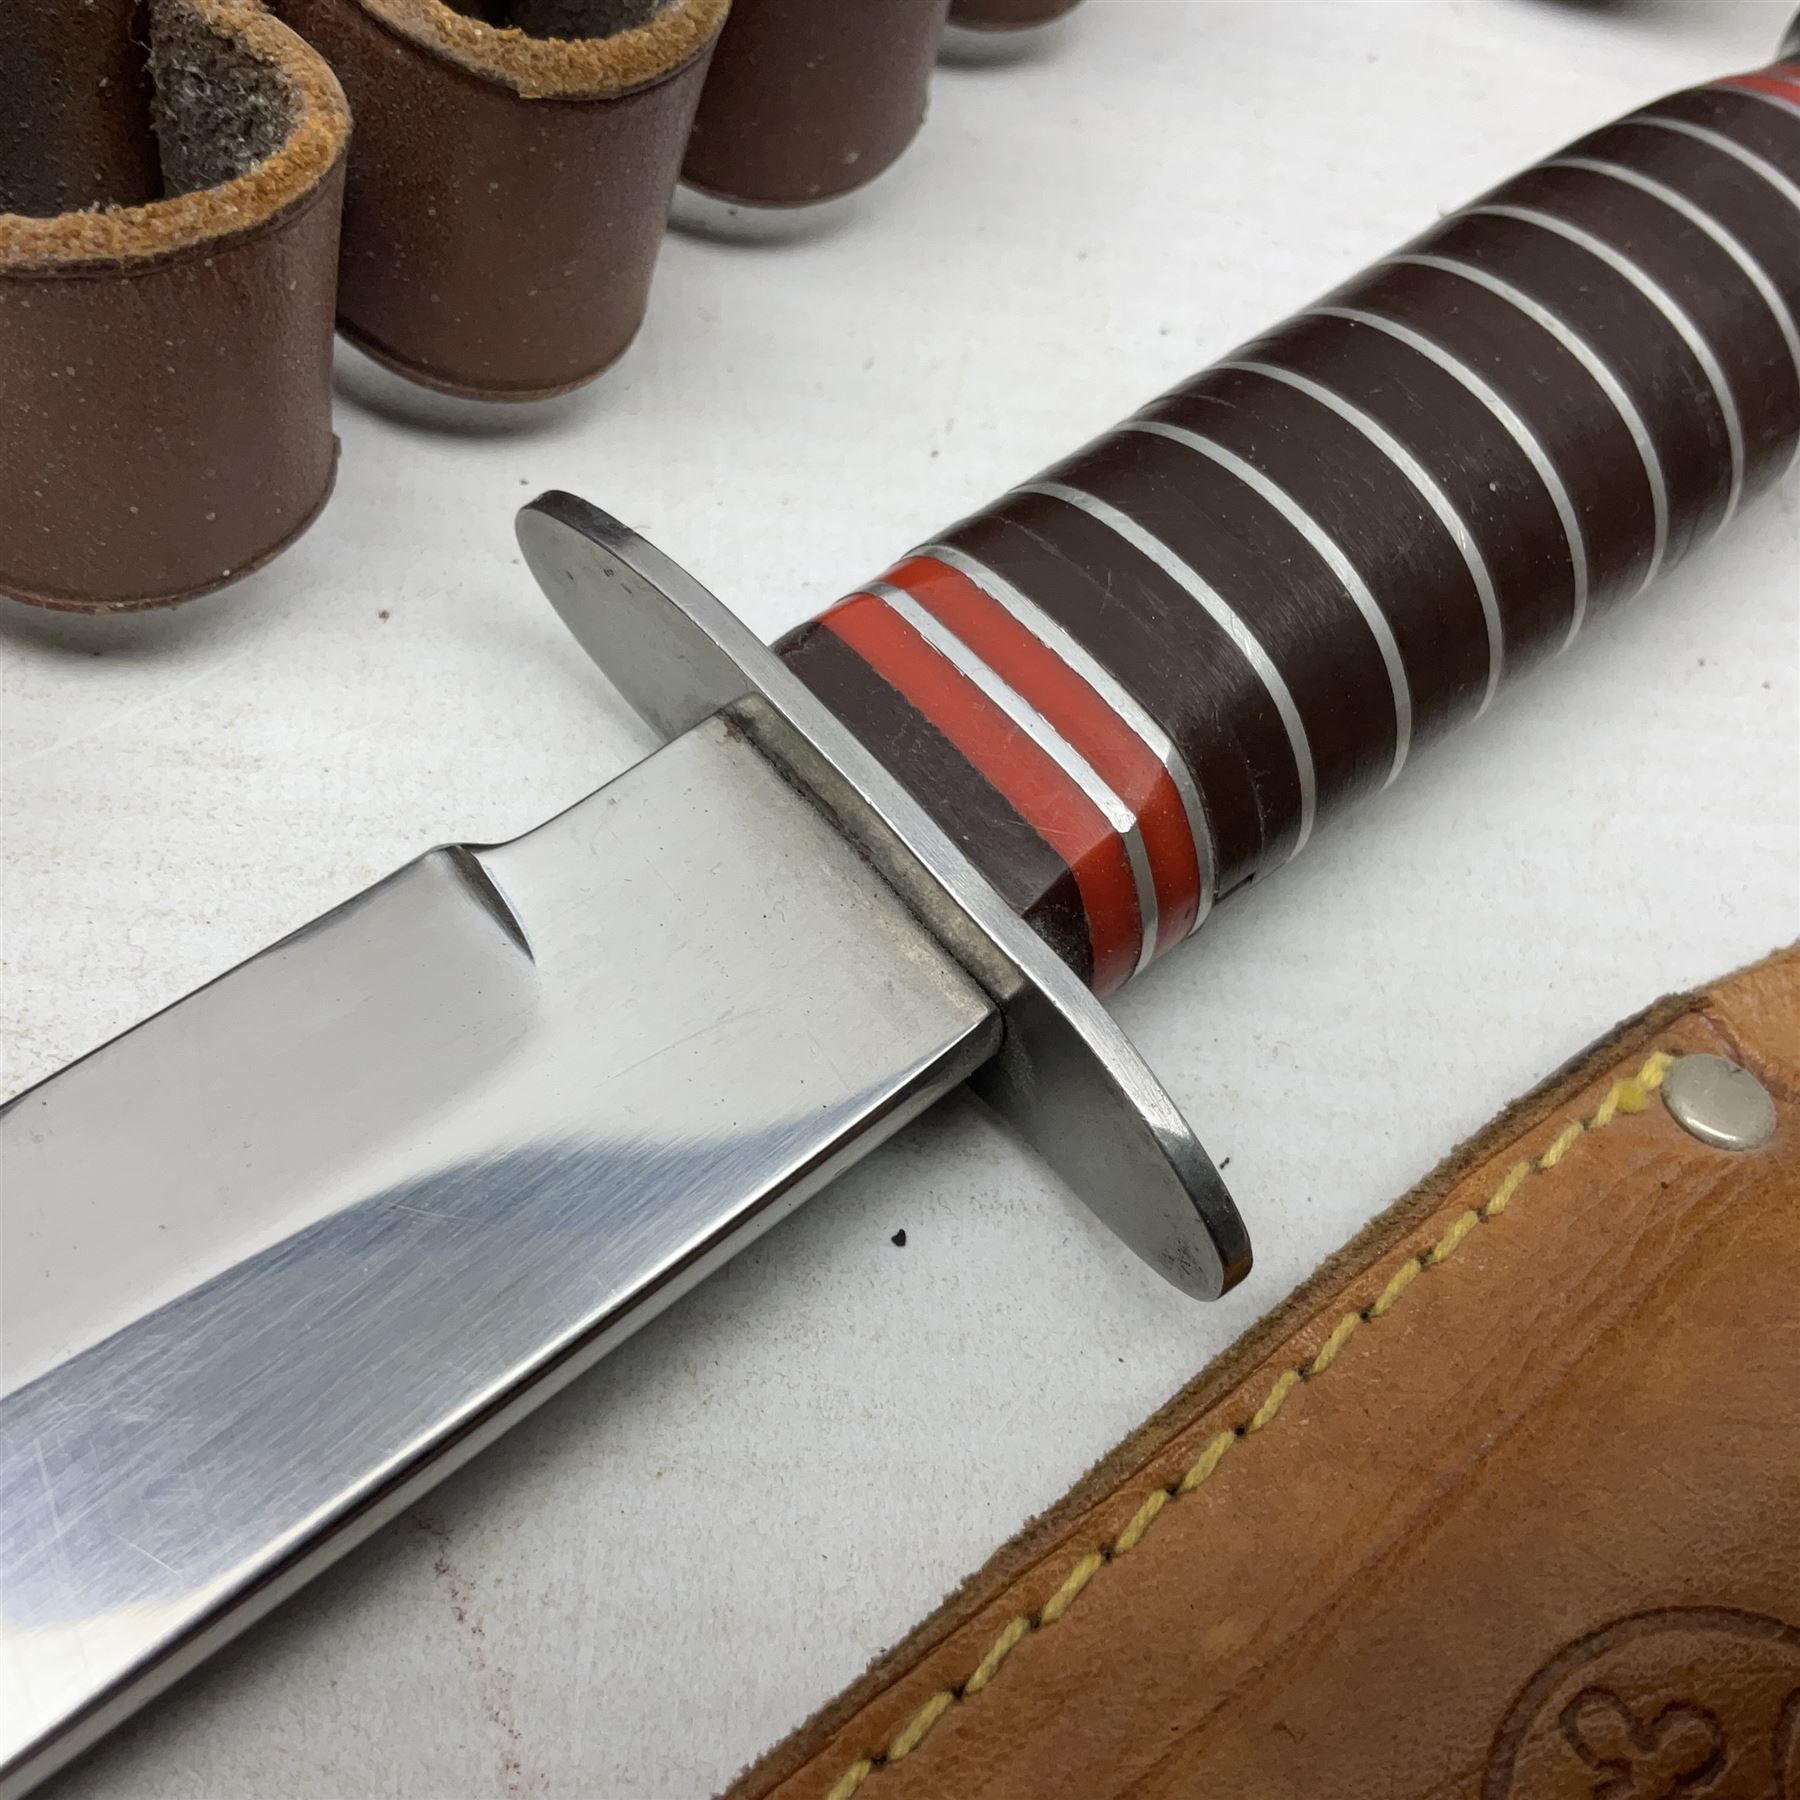 Mundial Brazil bowie knife - Image 5 of 21